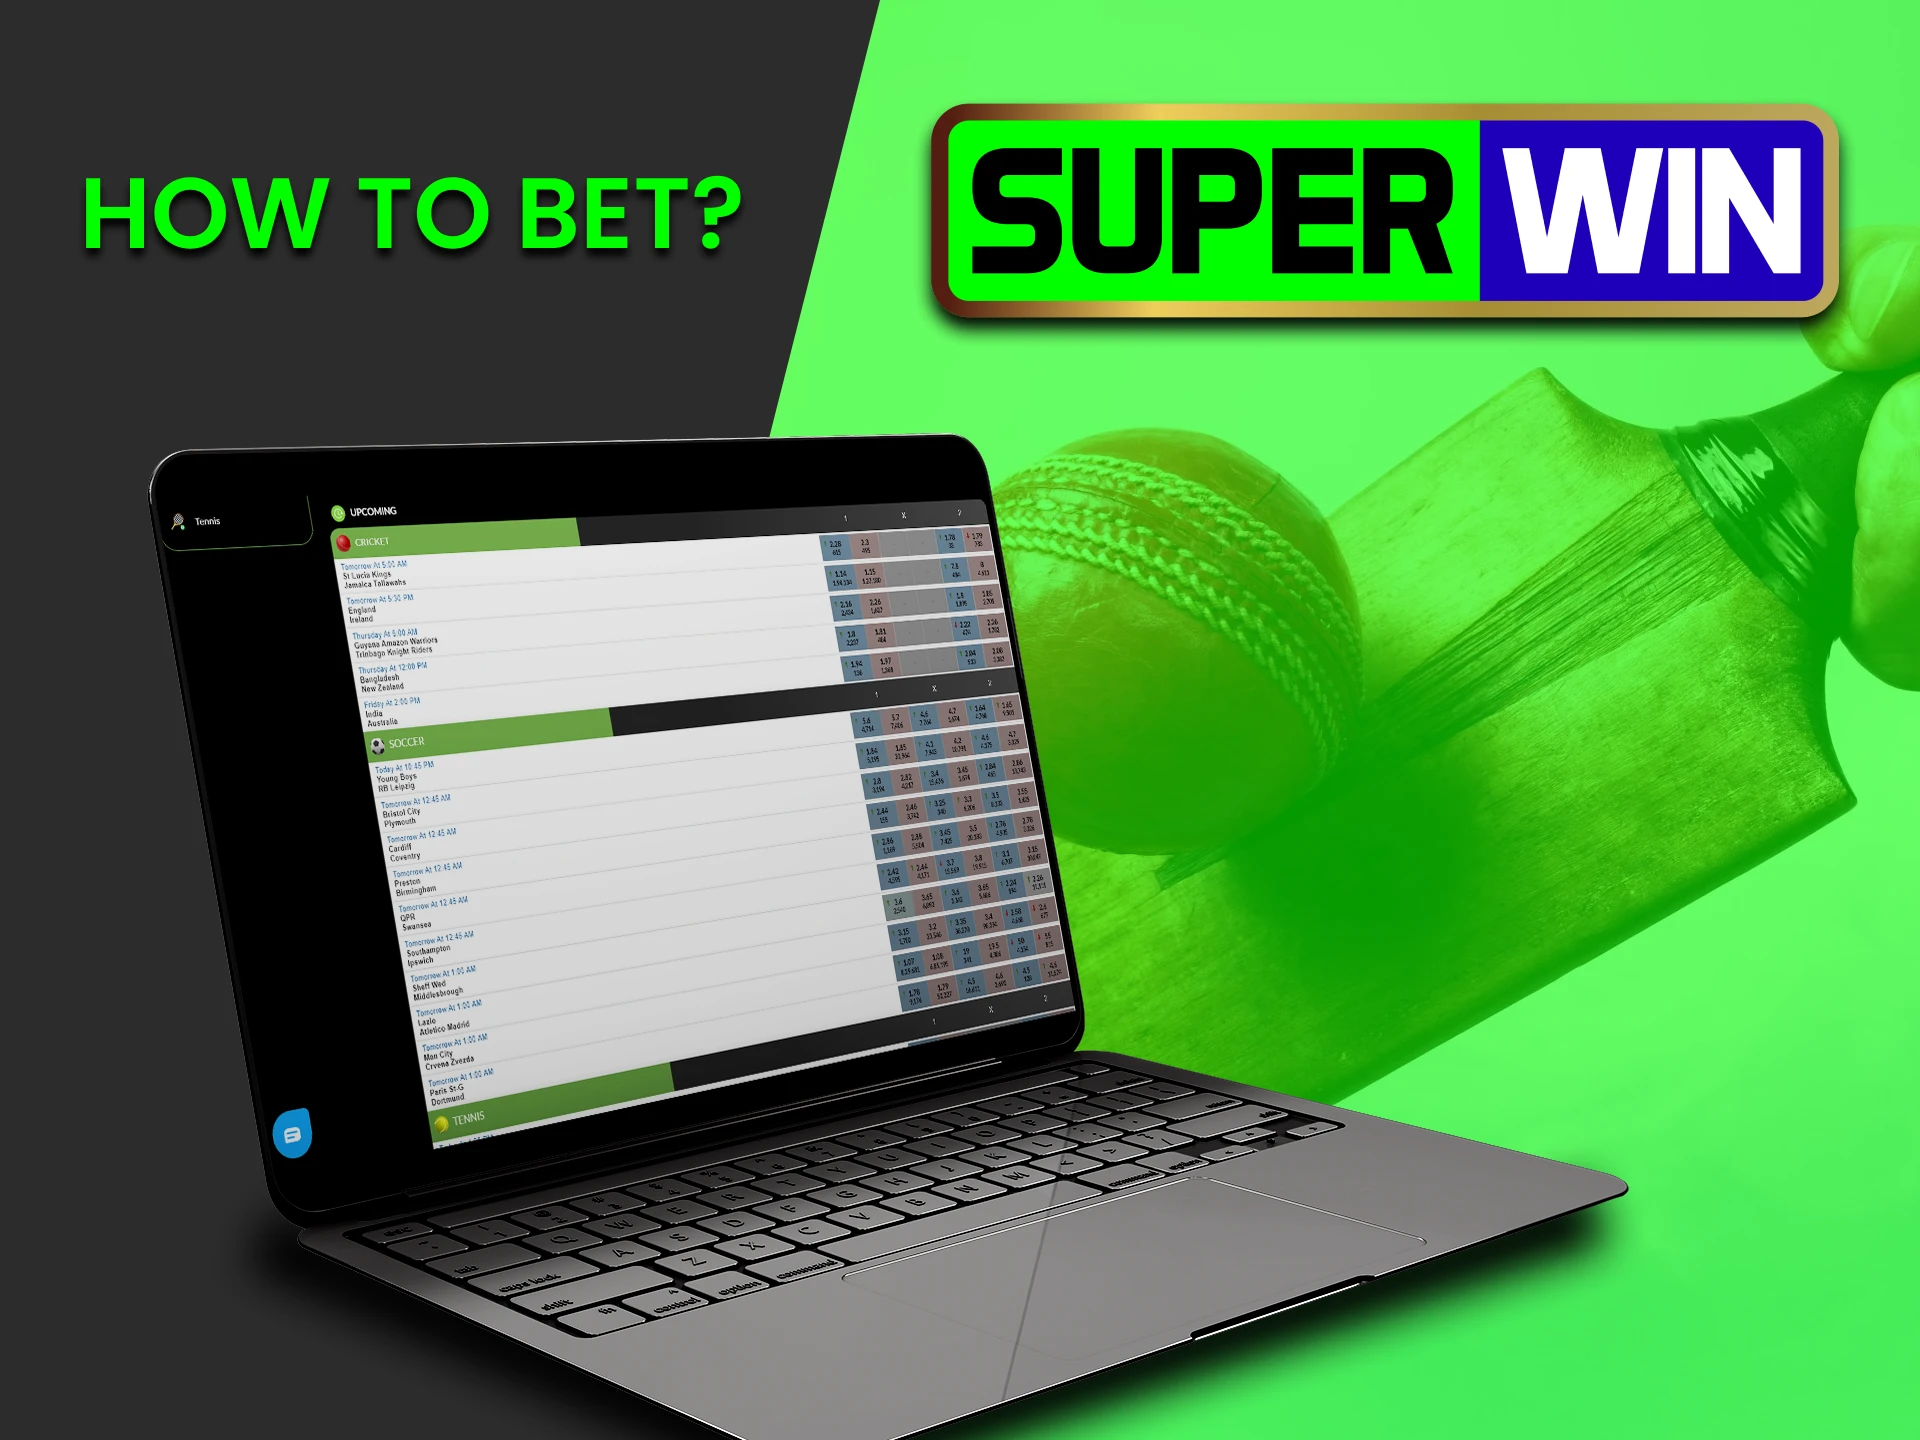 Find out how to start betting on Superwin.